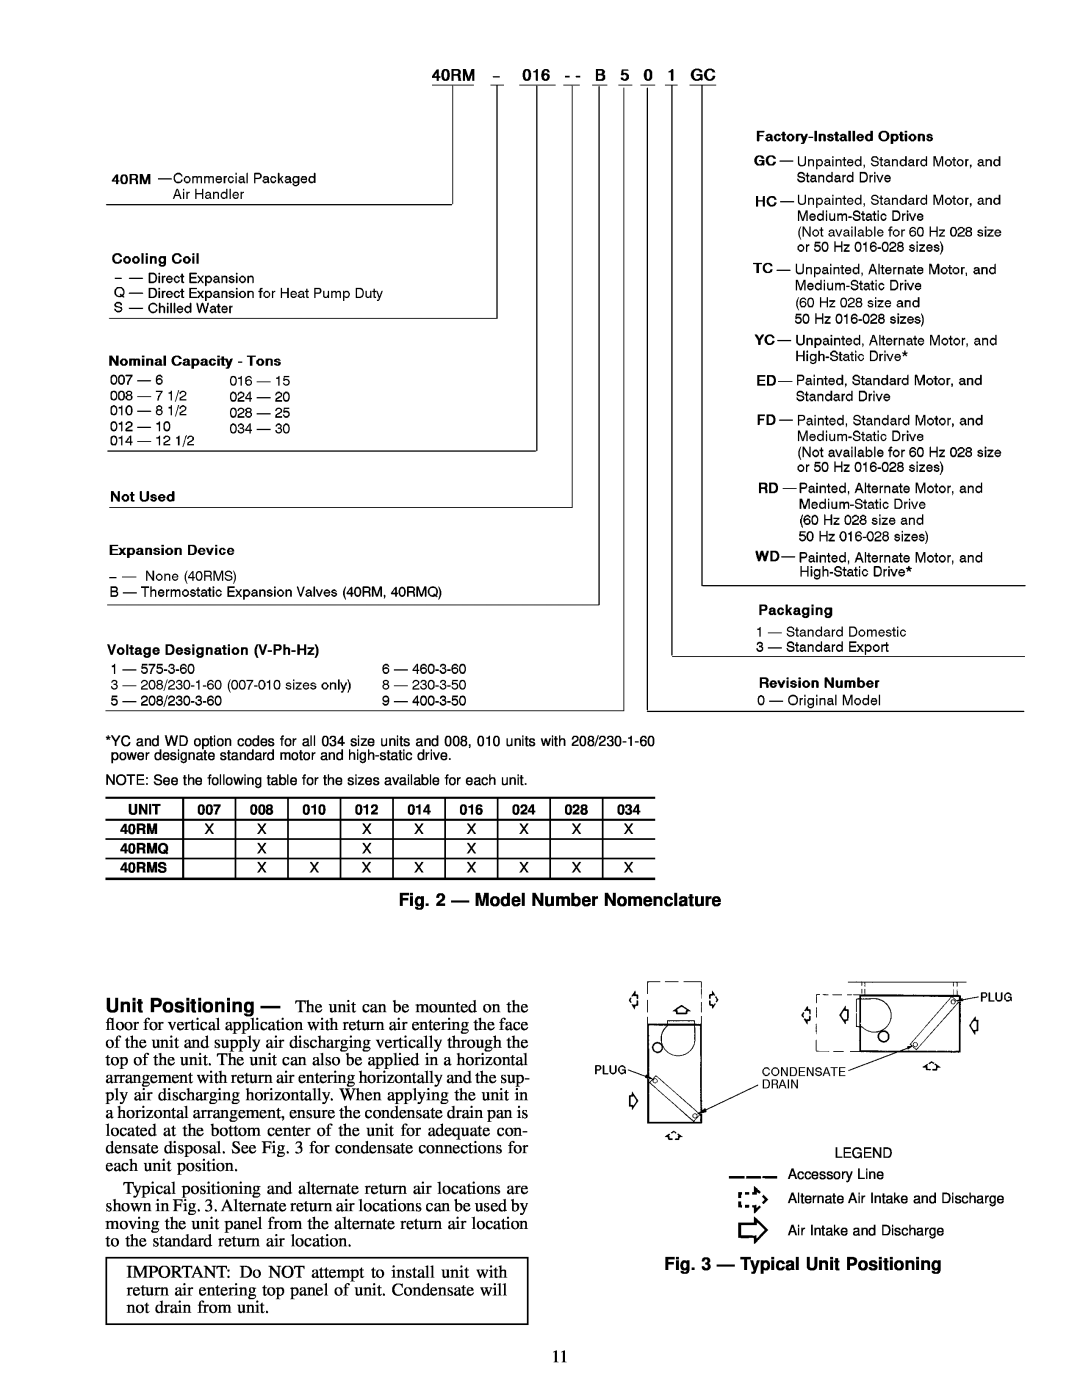 Carrier 40RMQ, 40RMS installation instructions Ð Model Number Nomenclature, Ð Typical Unit Positioning 